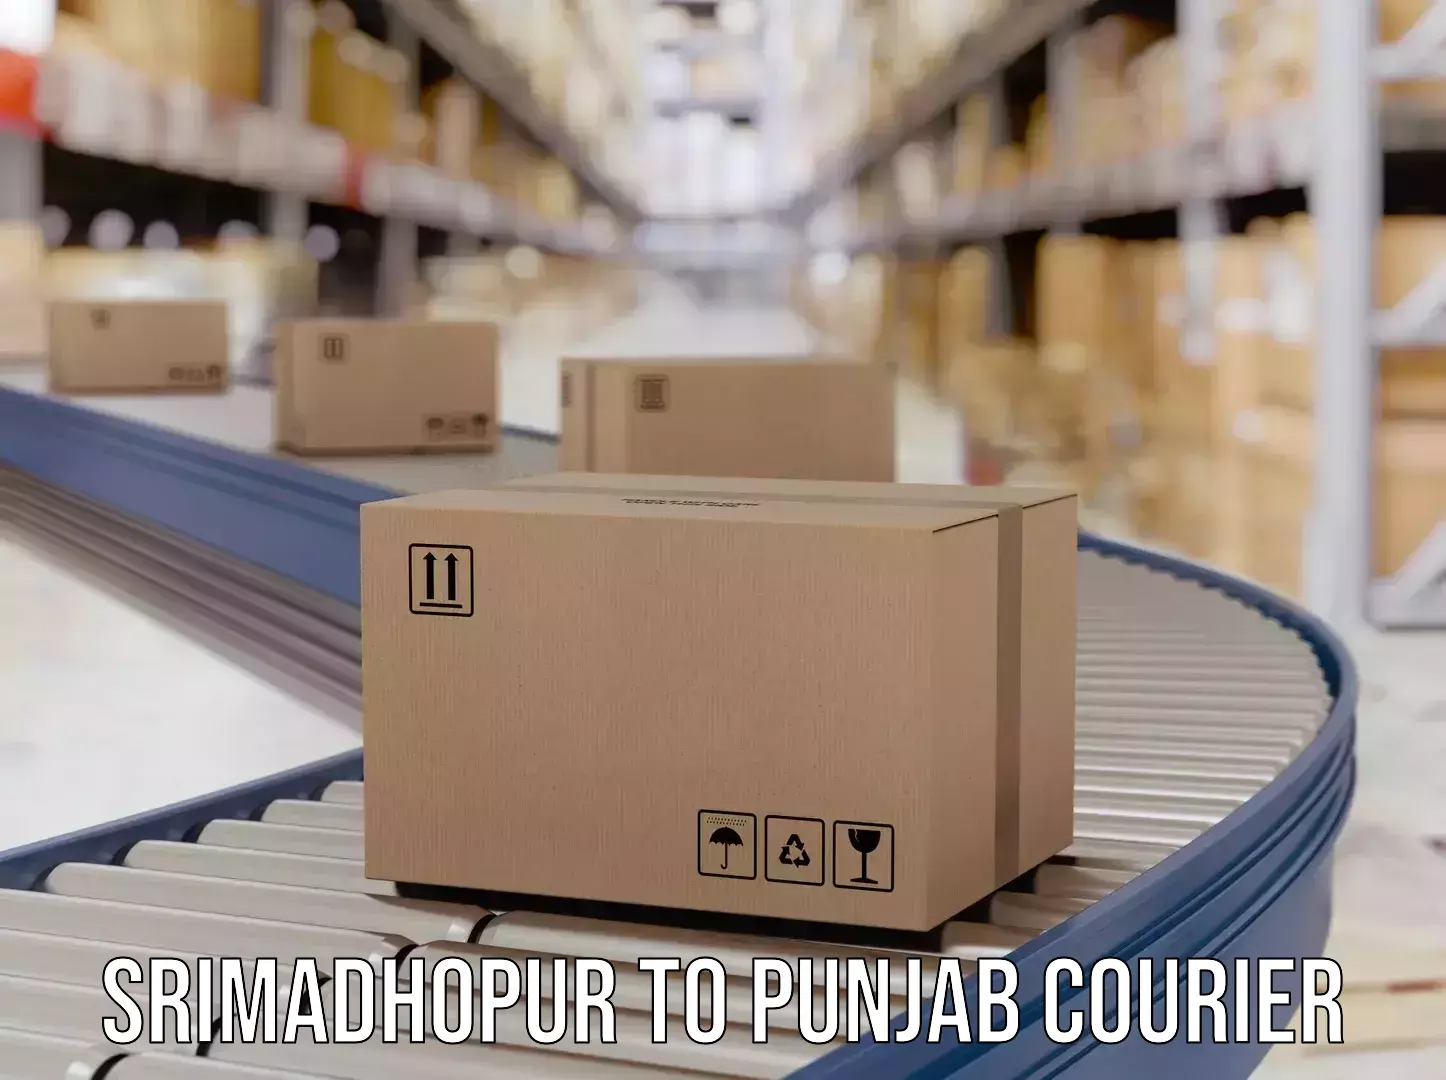 Express delivery capabilities Srimadhopur to Punjab